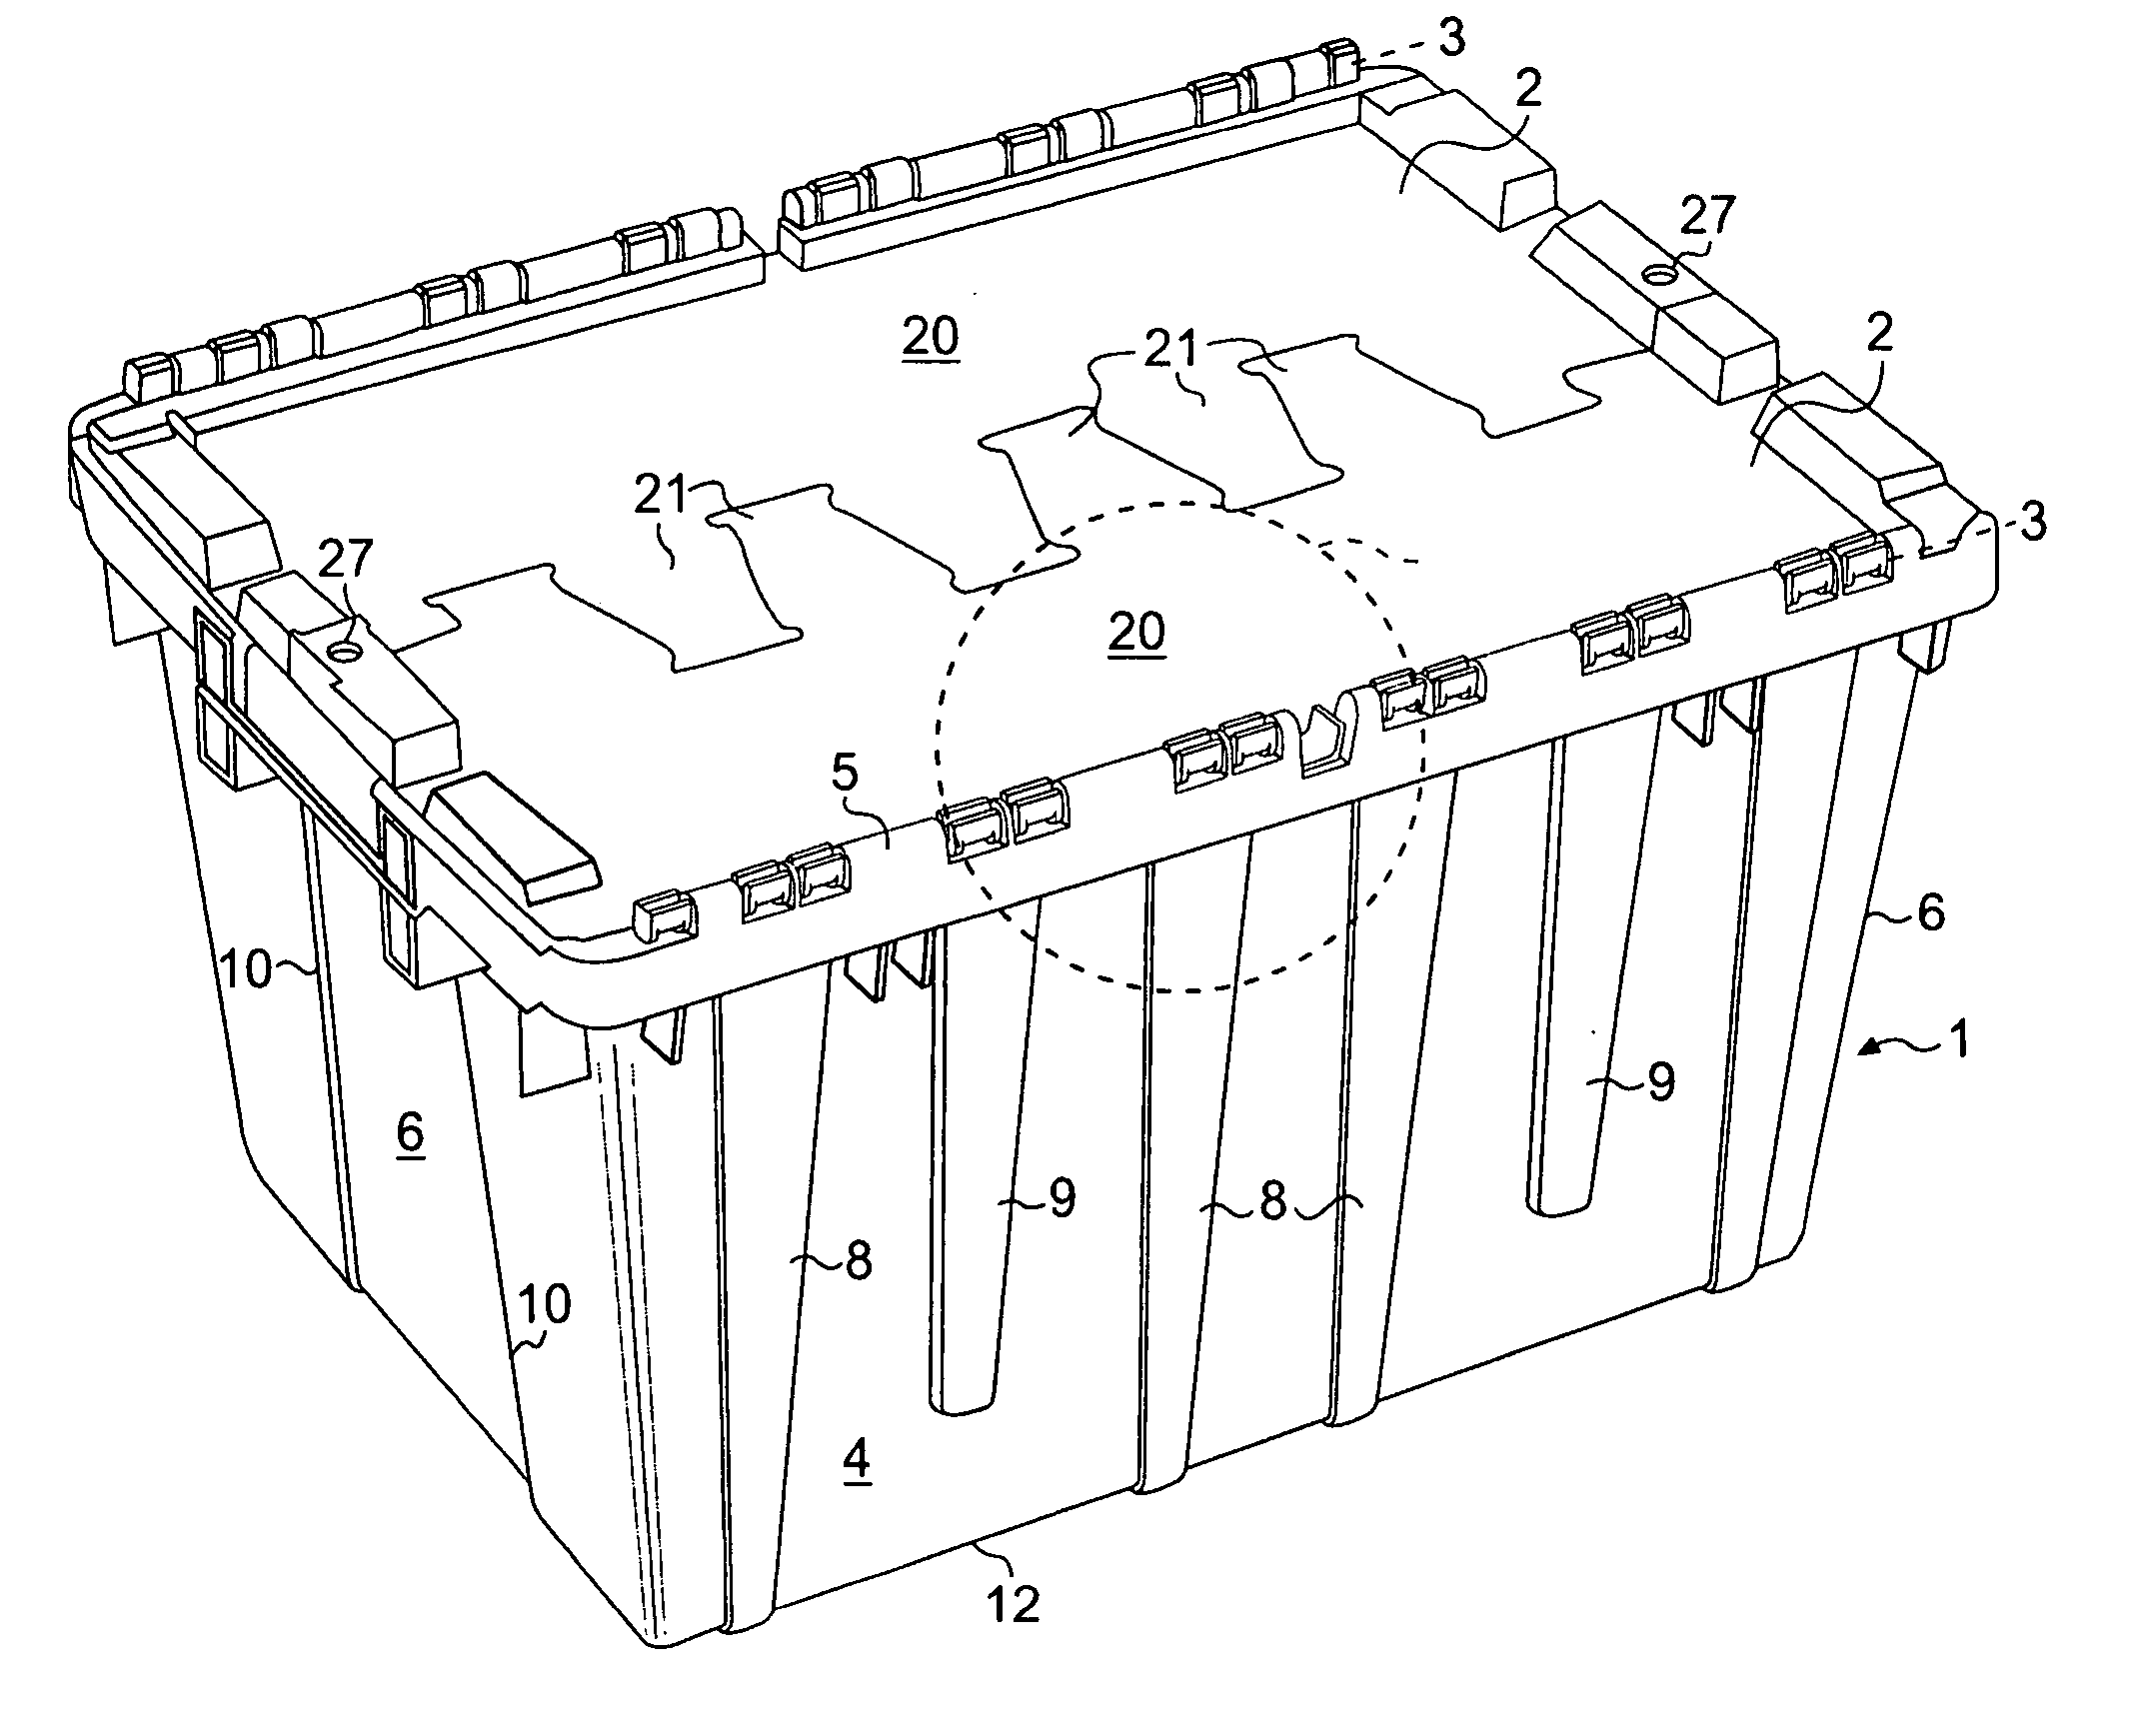 Container with hinged lids and method of molding the container and assembling the hinged lids on the container in the molding process